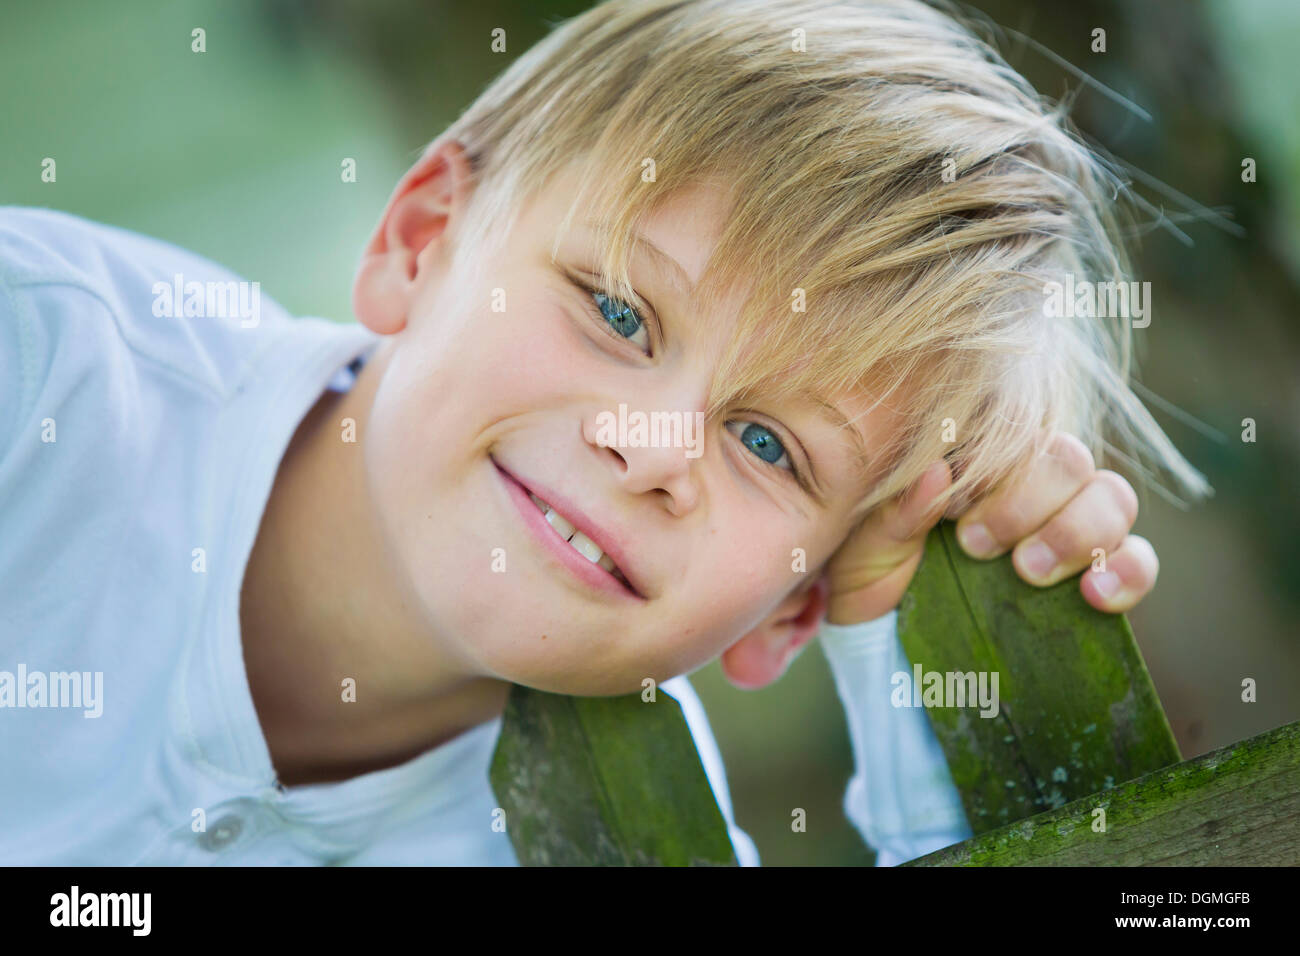 Boy, 9 years old, holding on to a wooden fence Stock Photo